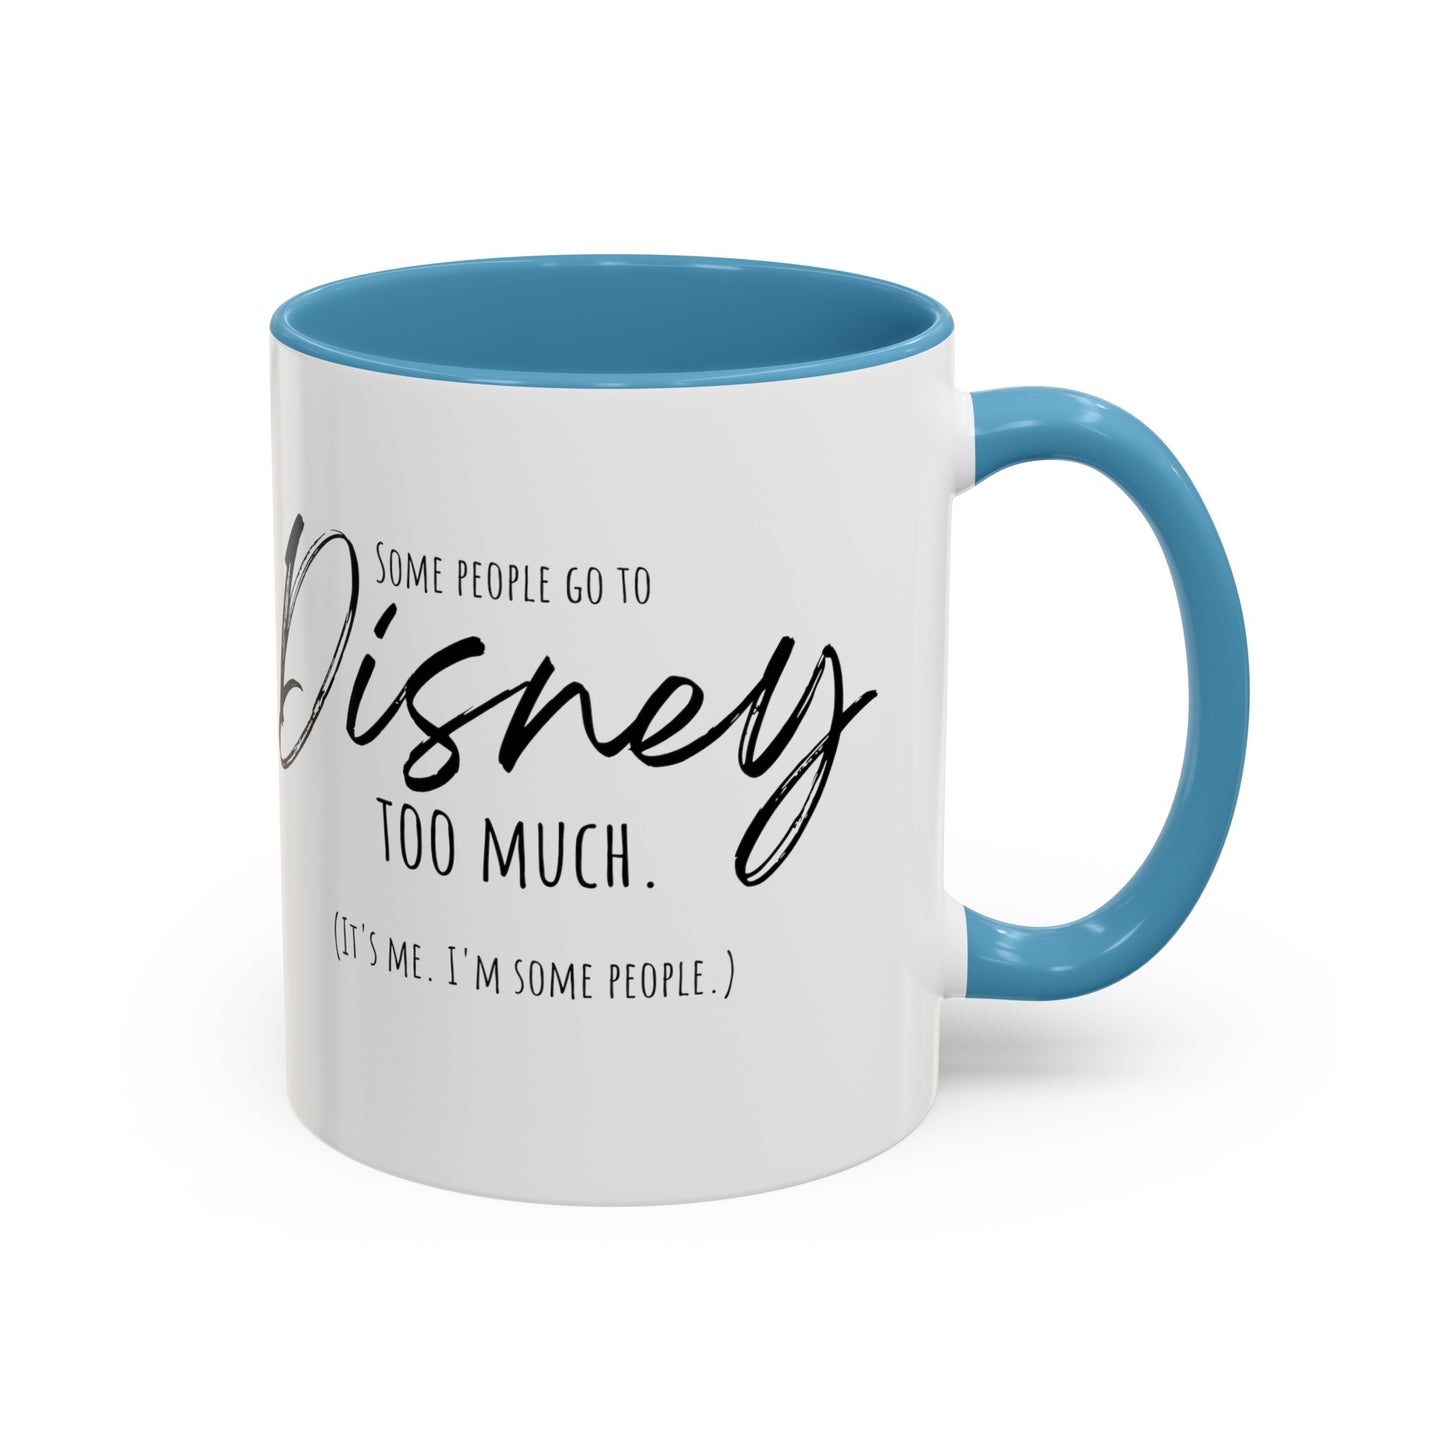 Some People Go To Disney Too Much - Accent Coffee Mug, 11oz